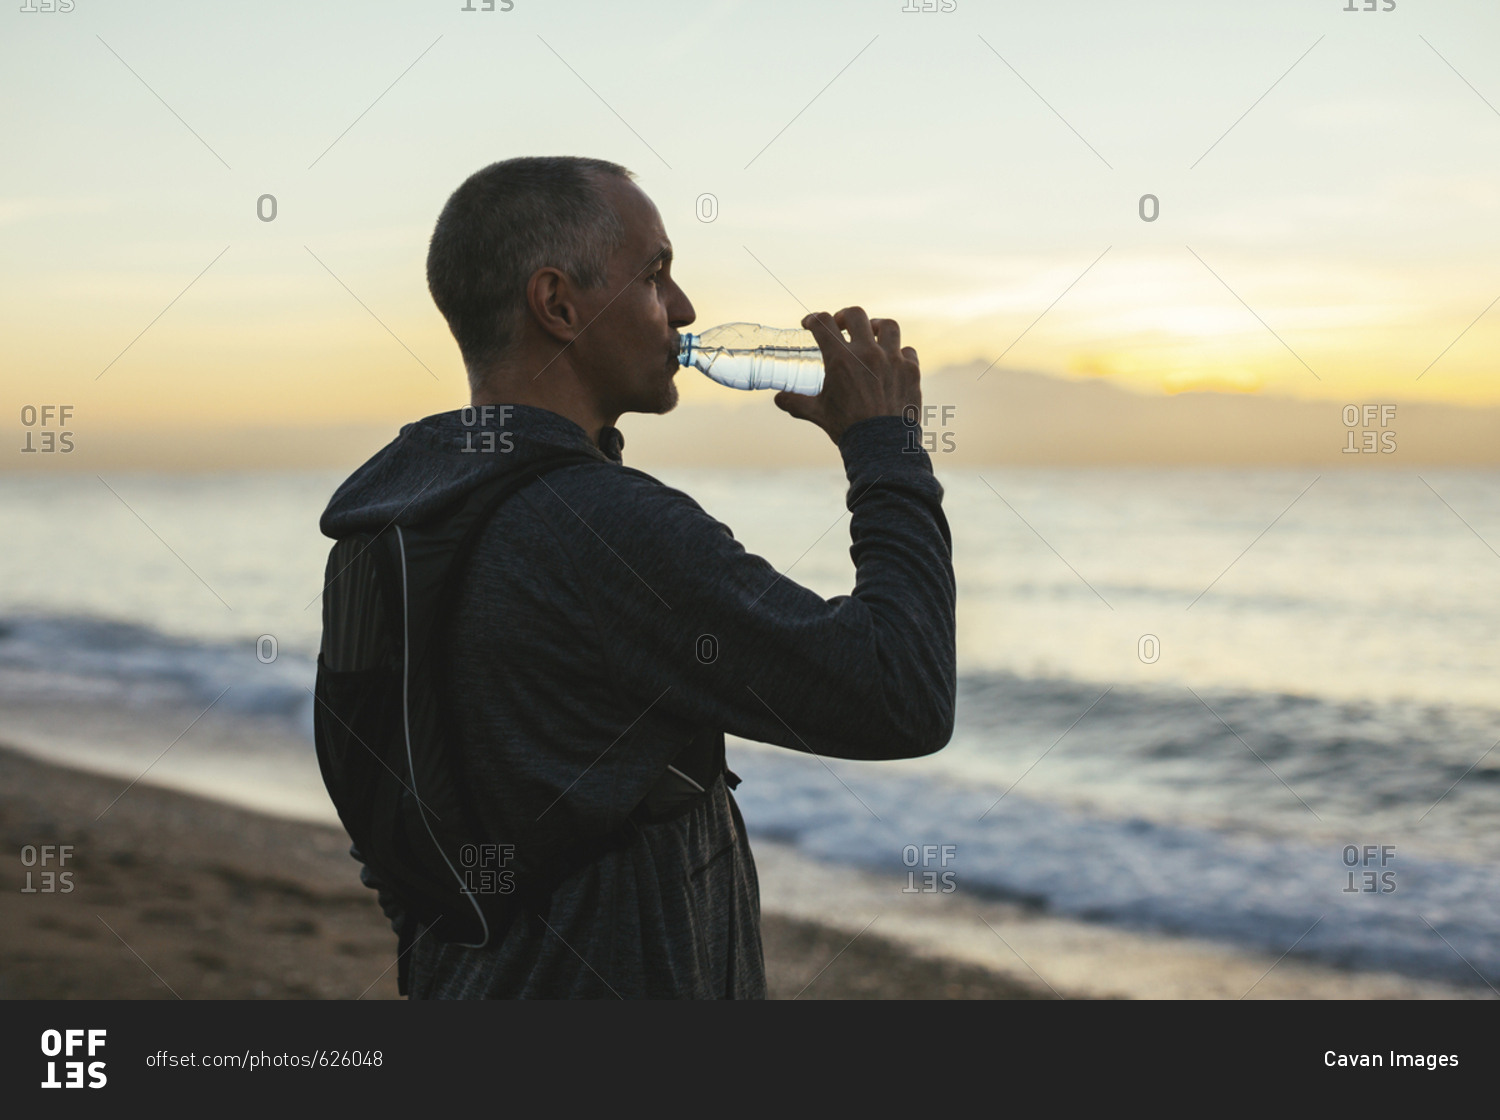 Side view of man drinking water while standing at beach during sunset